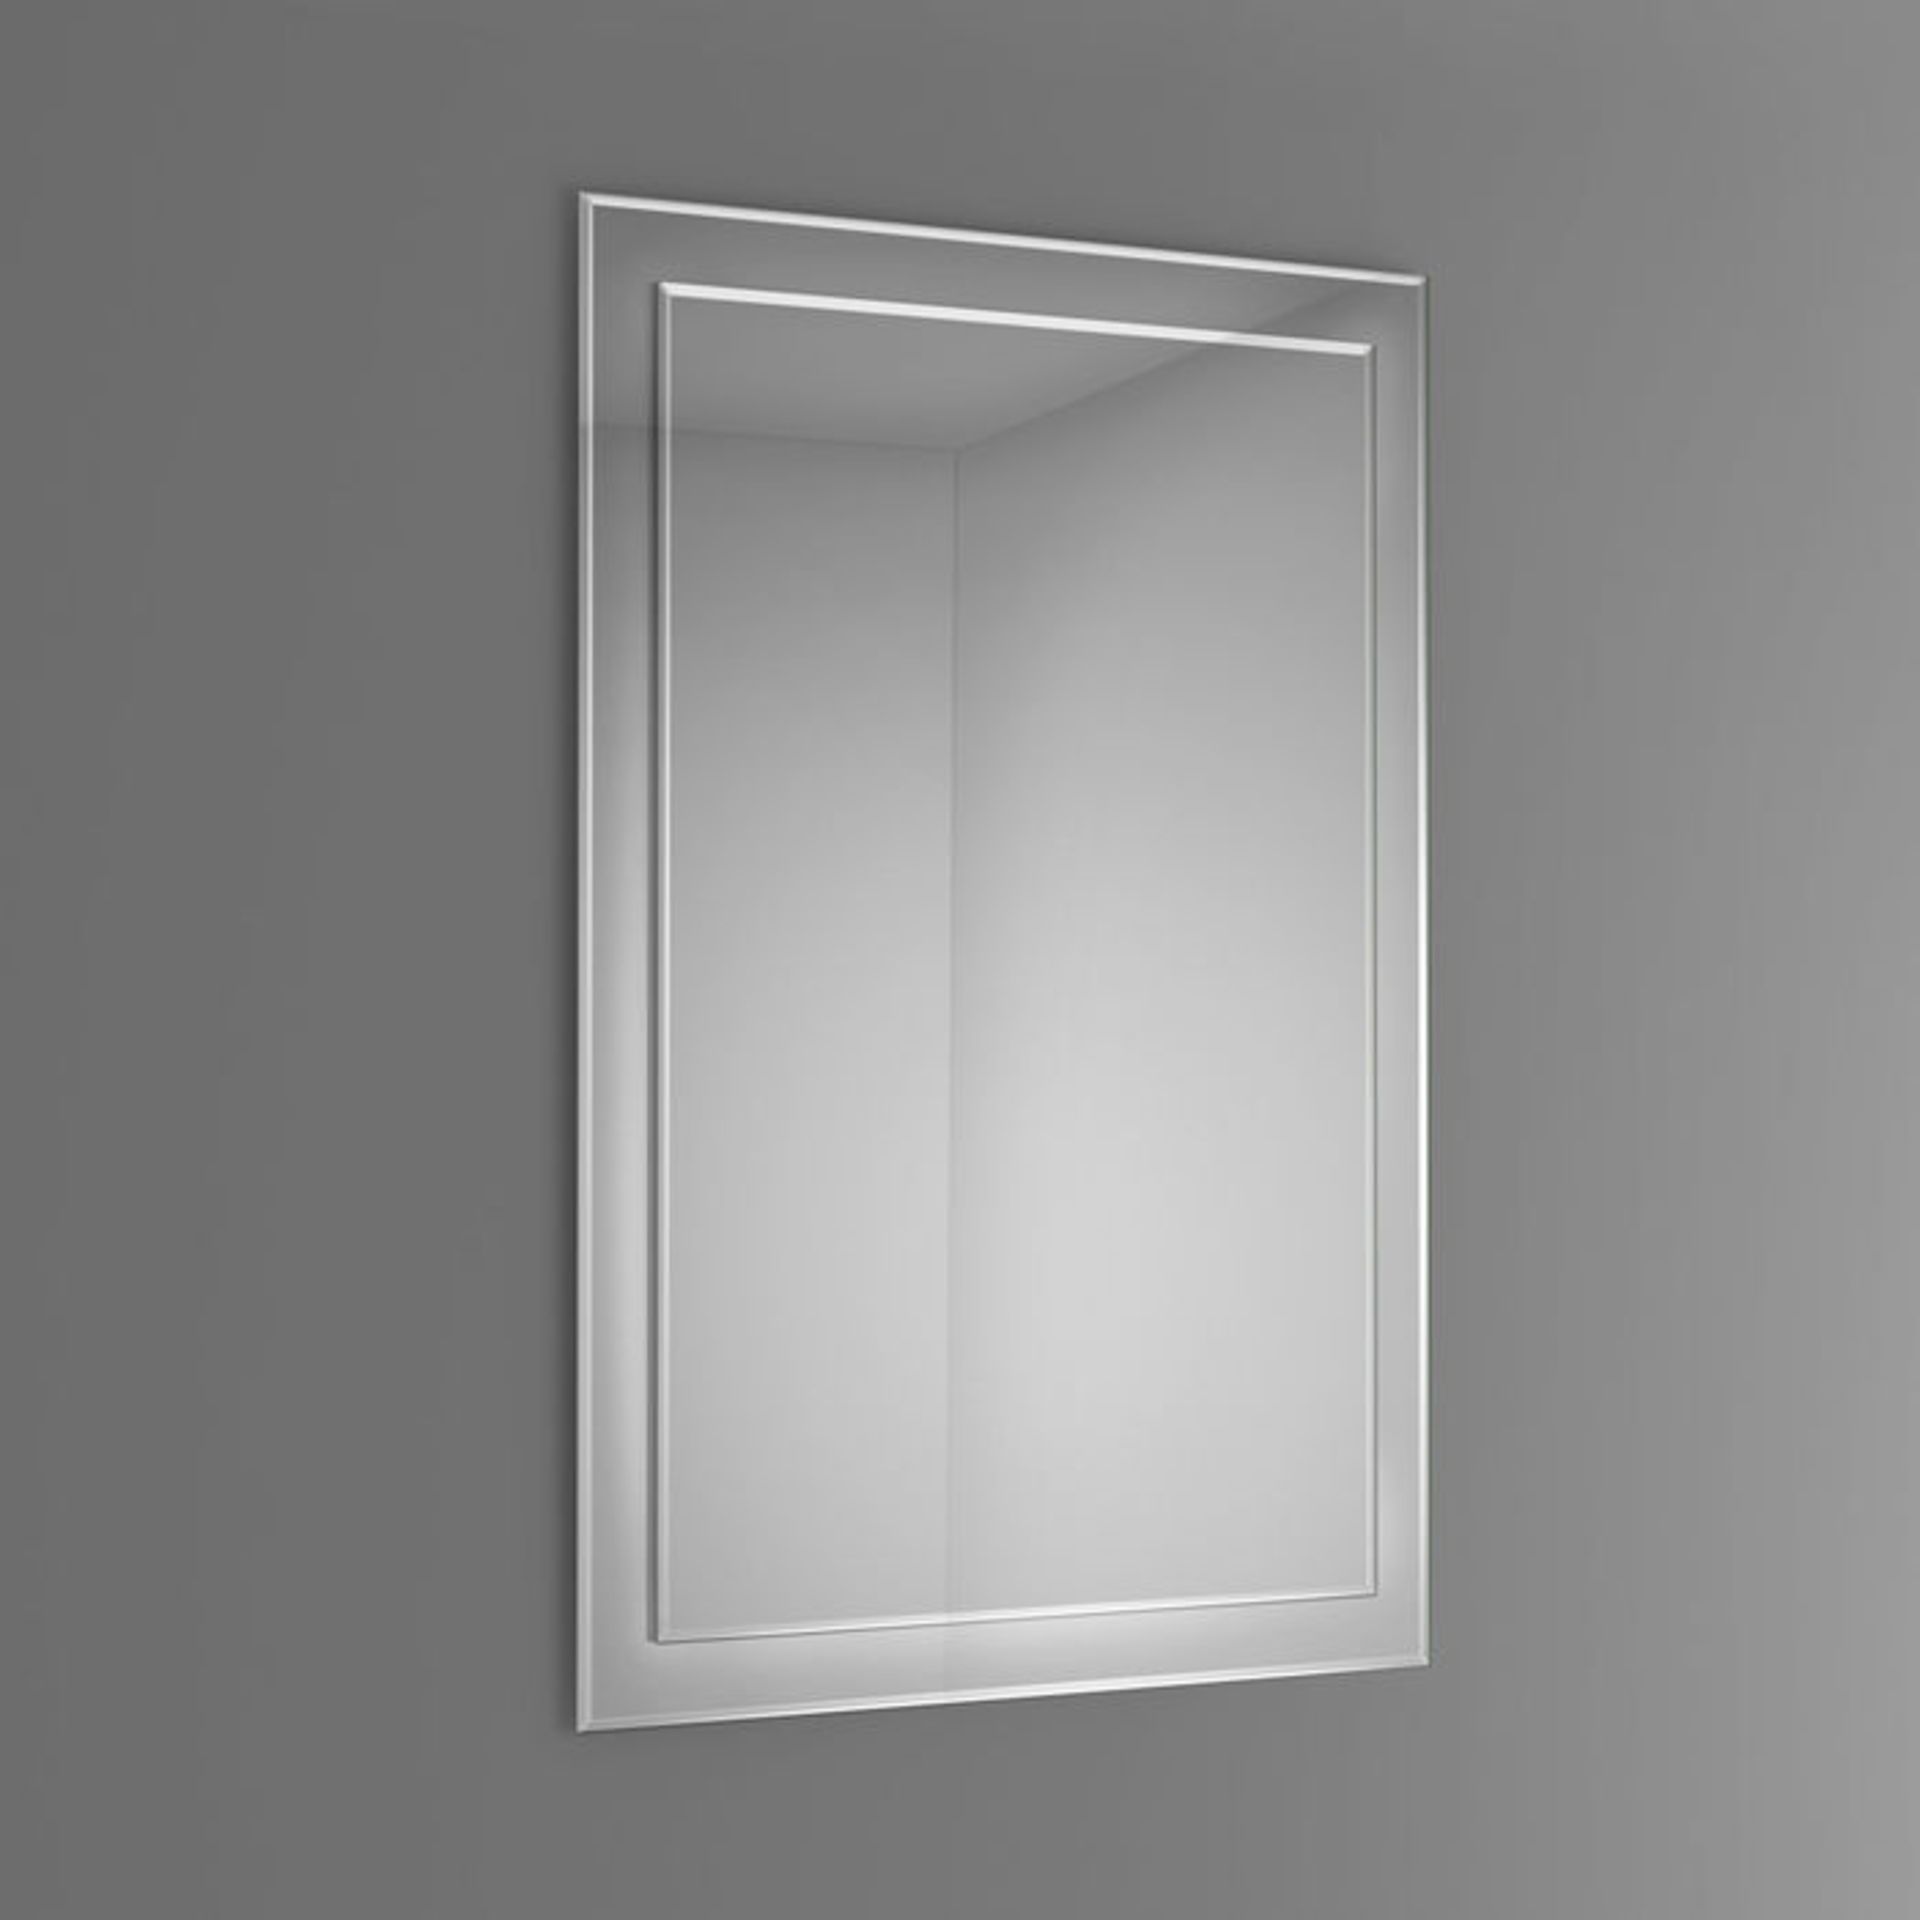 (O89) 500x700mm Bevel Mirror. RRP £69.99. Smooth beveled edge for additional safety and style - Image 3 of 3